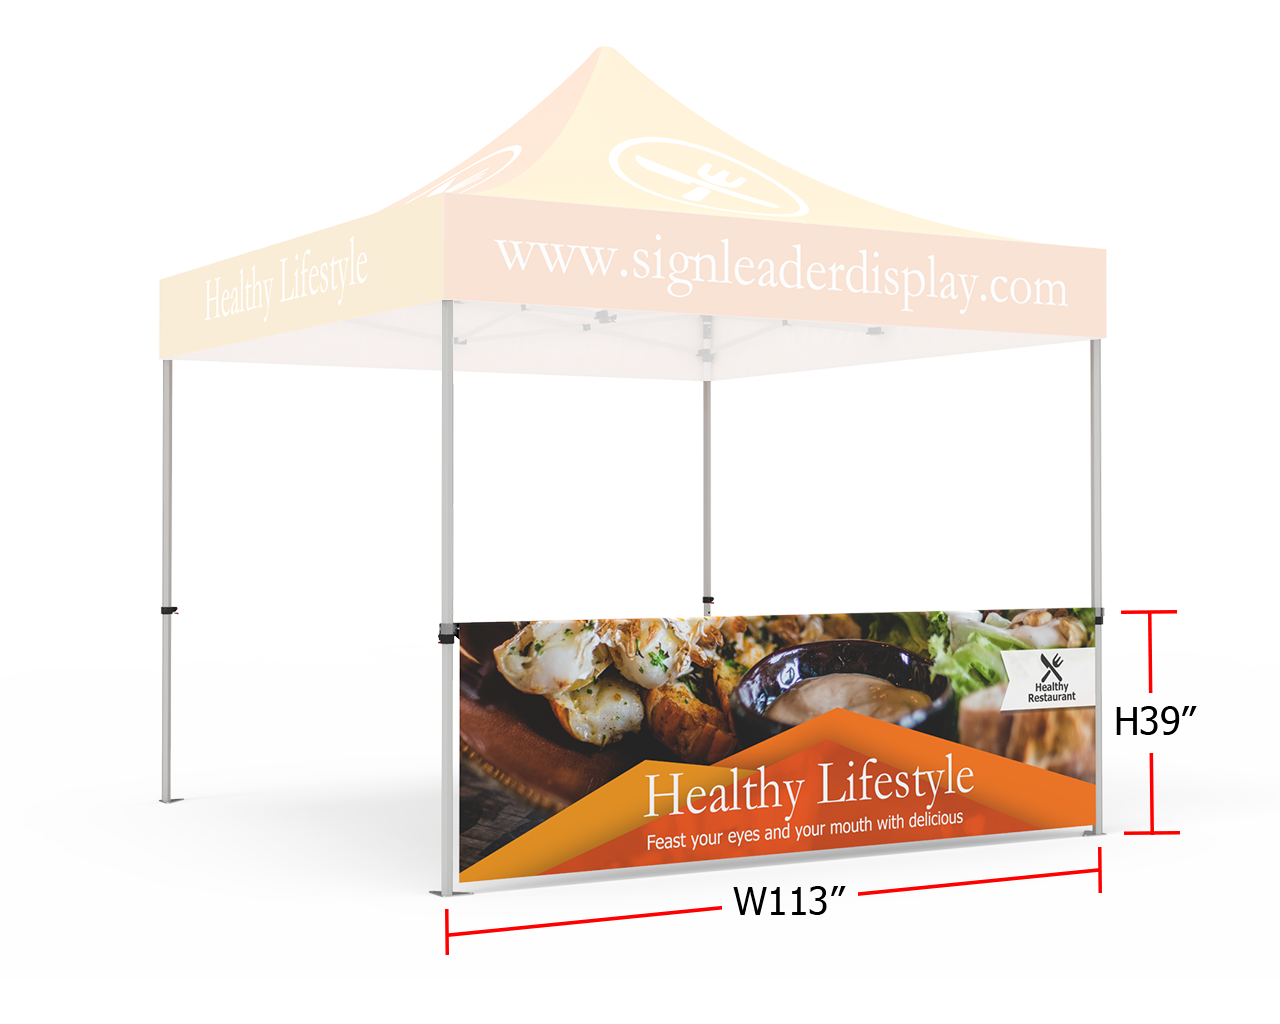 Custom Printed Tent Halfwall for 10x10 Tent - Signleader